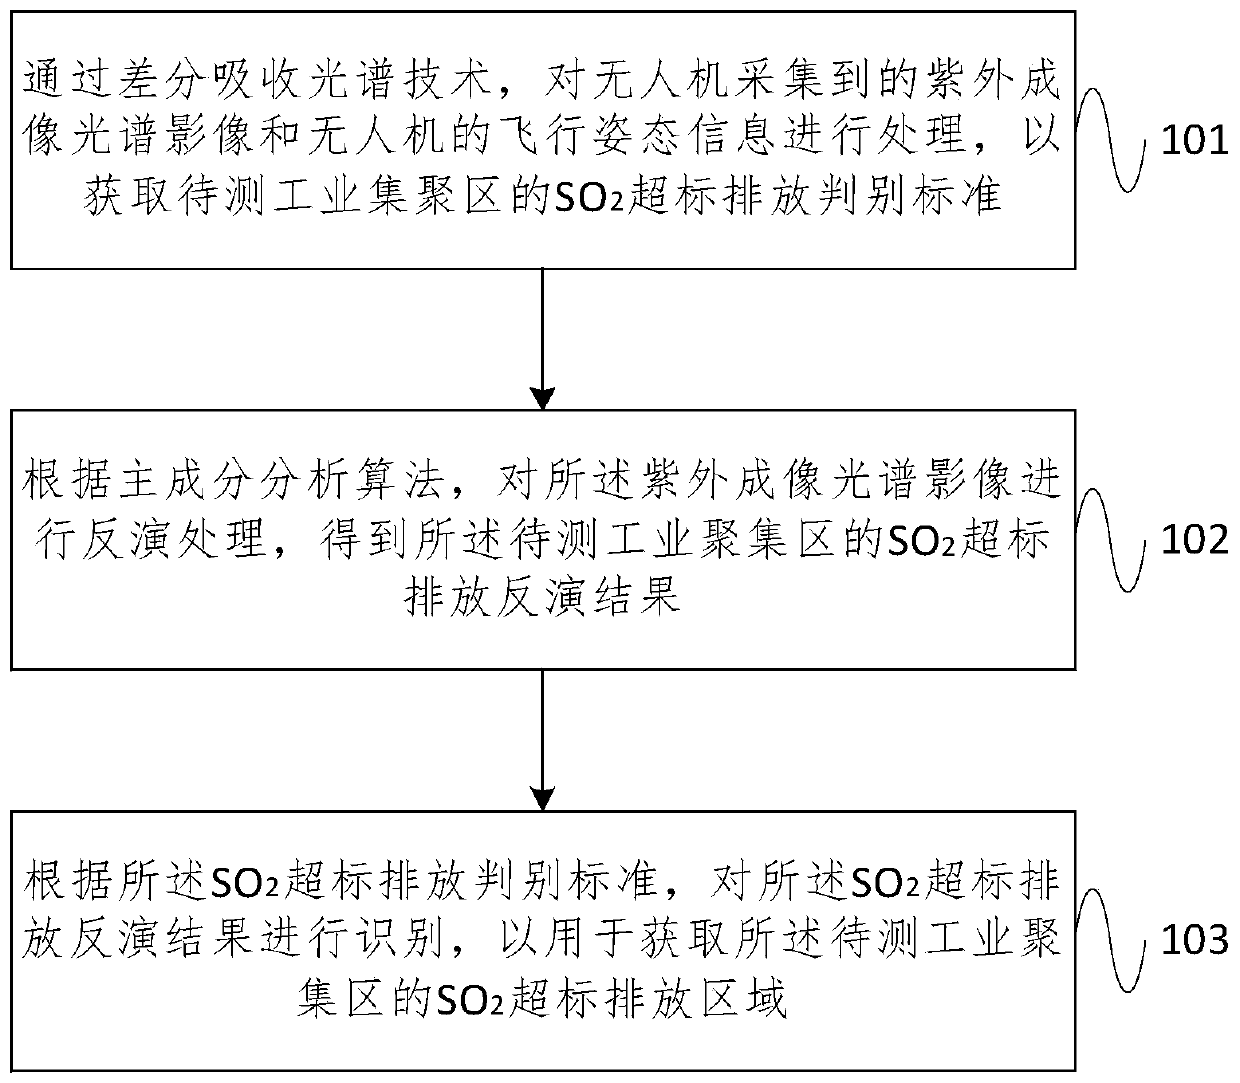 Method and system for monitoring air pollution source SO2 based on UAV